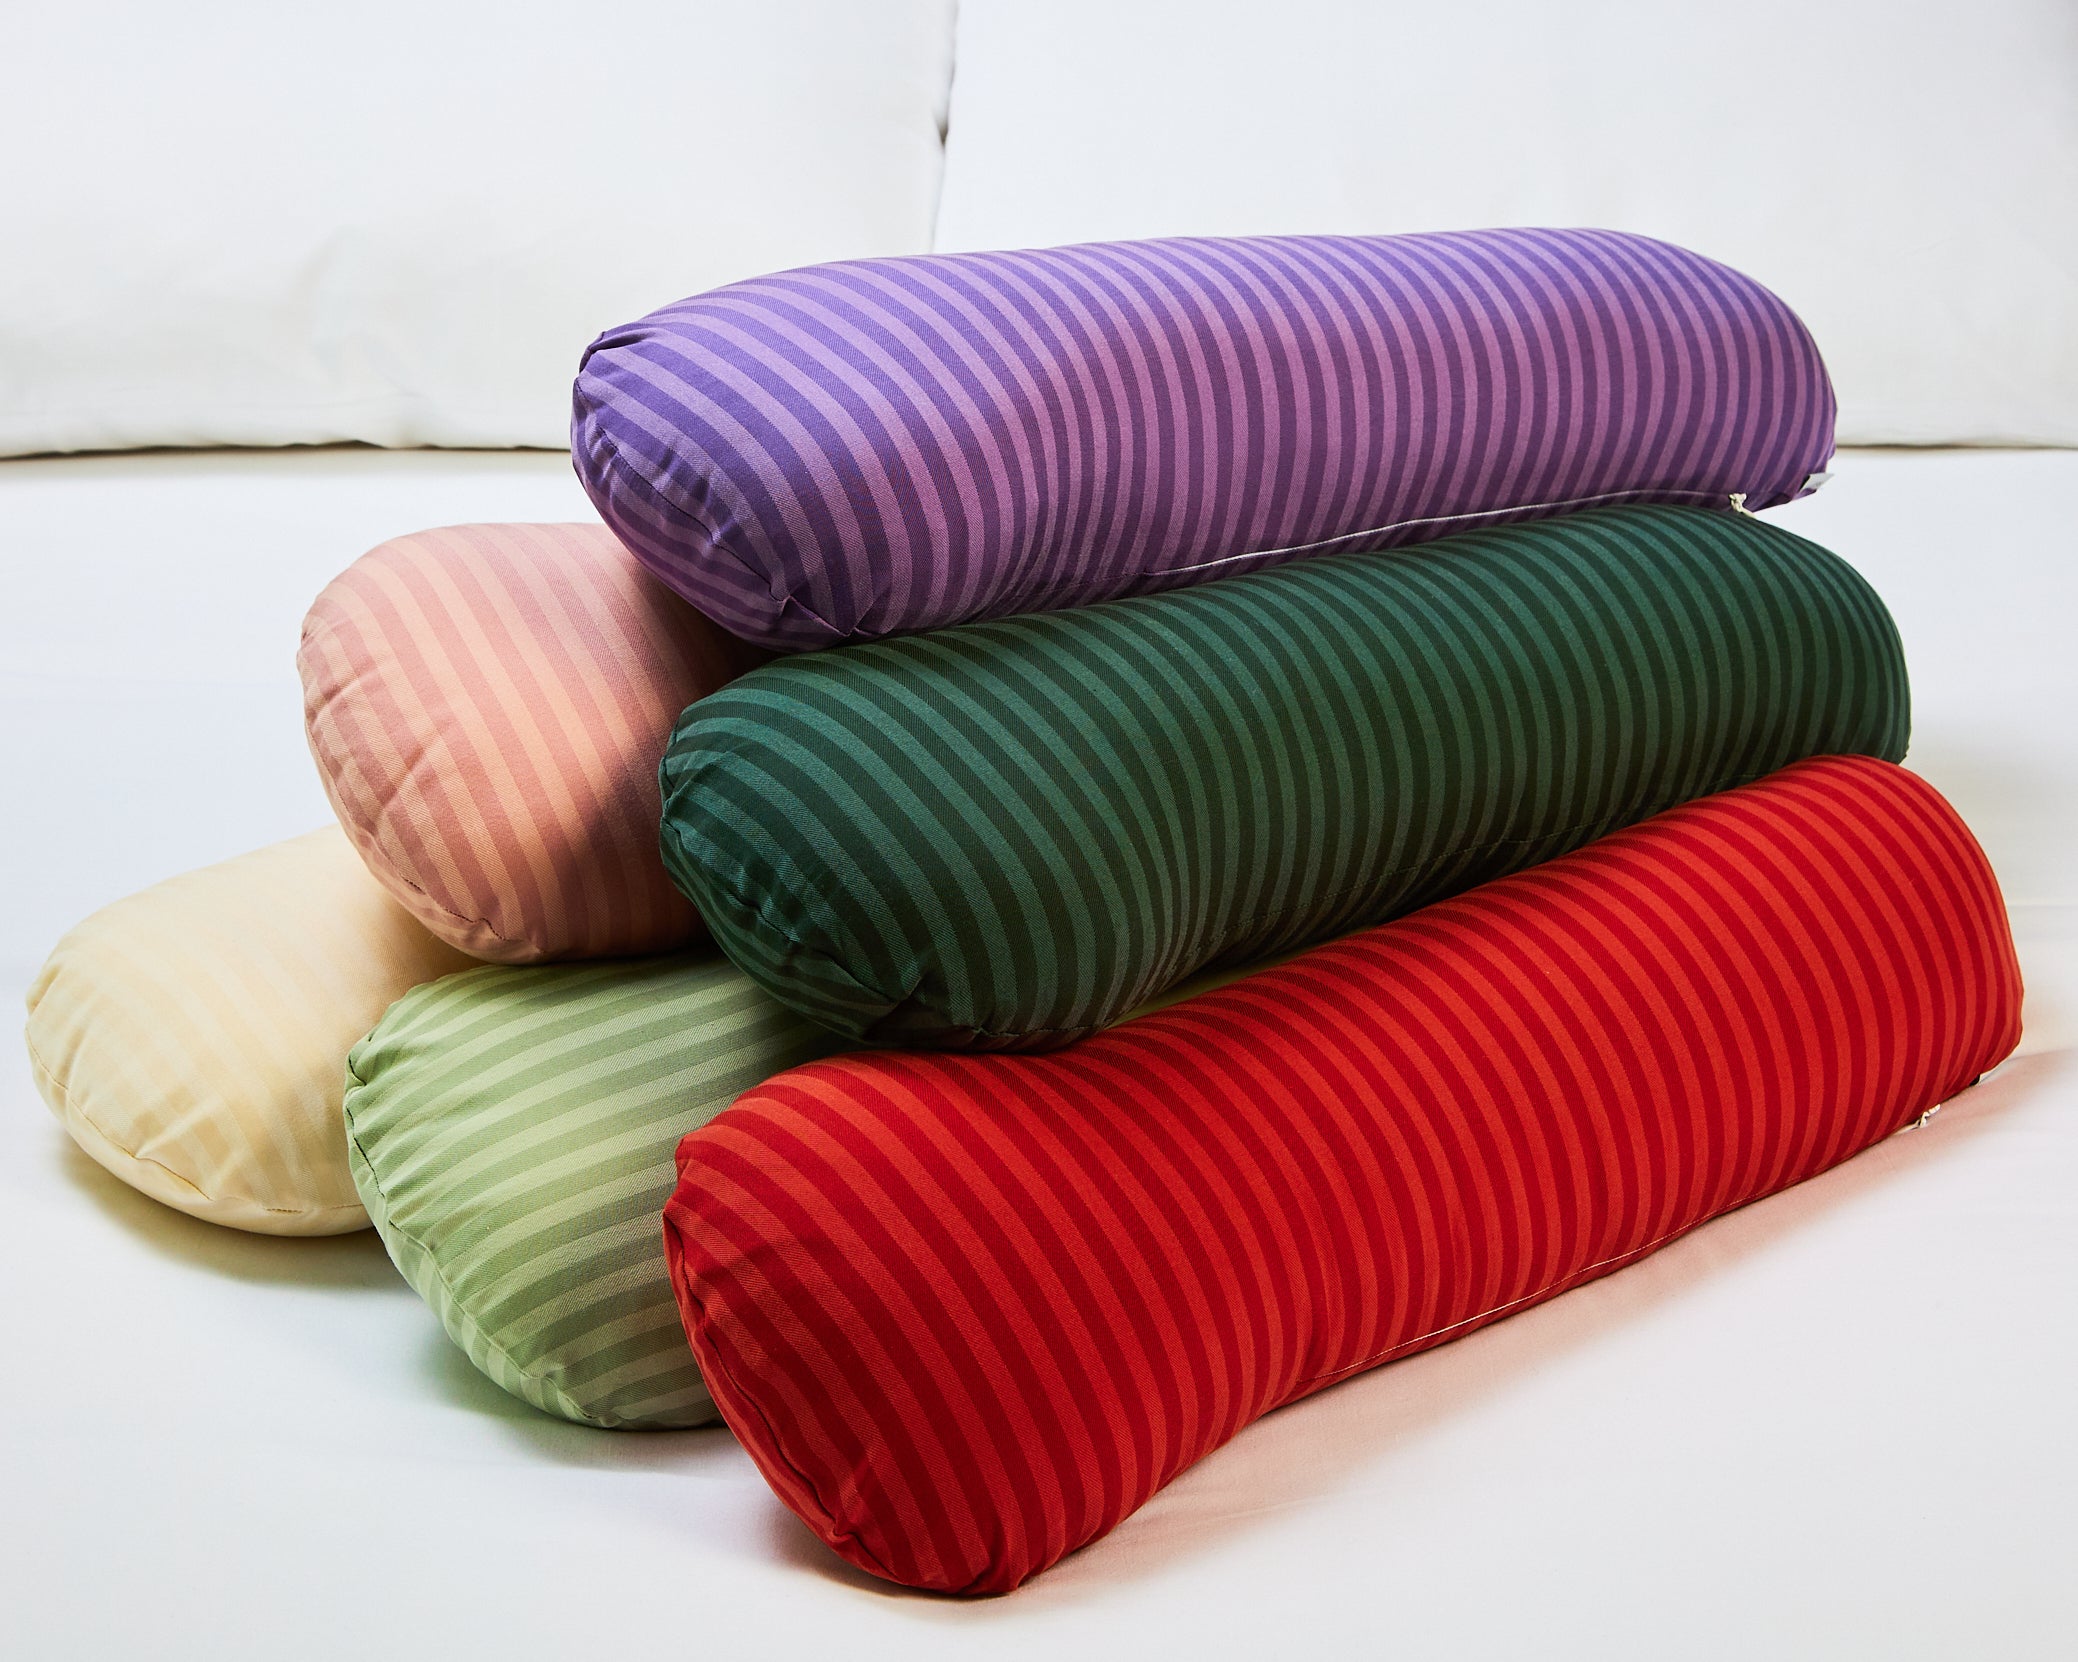 Different colour options of weighted sleeper pillows